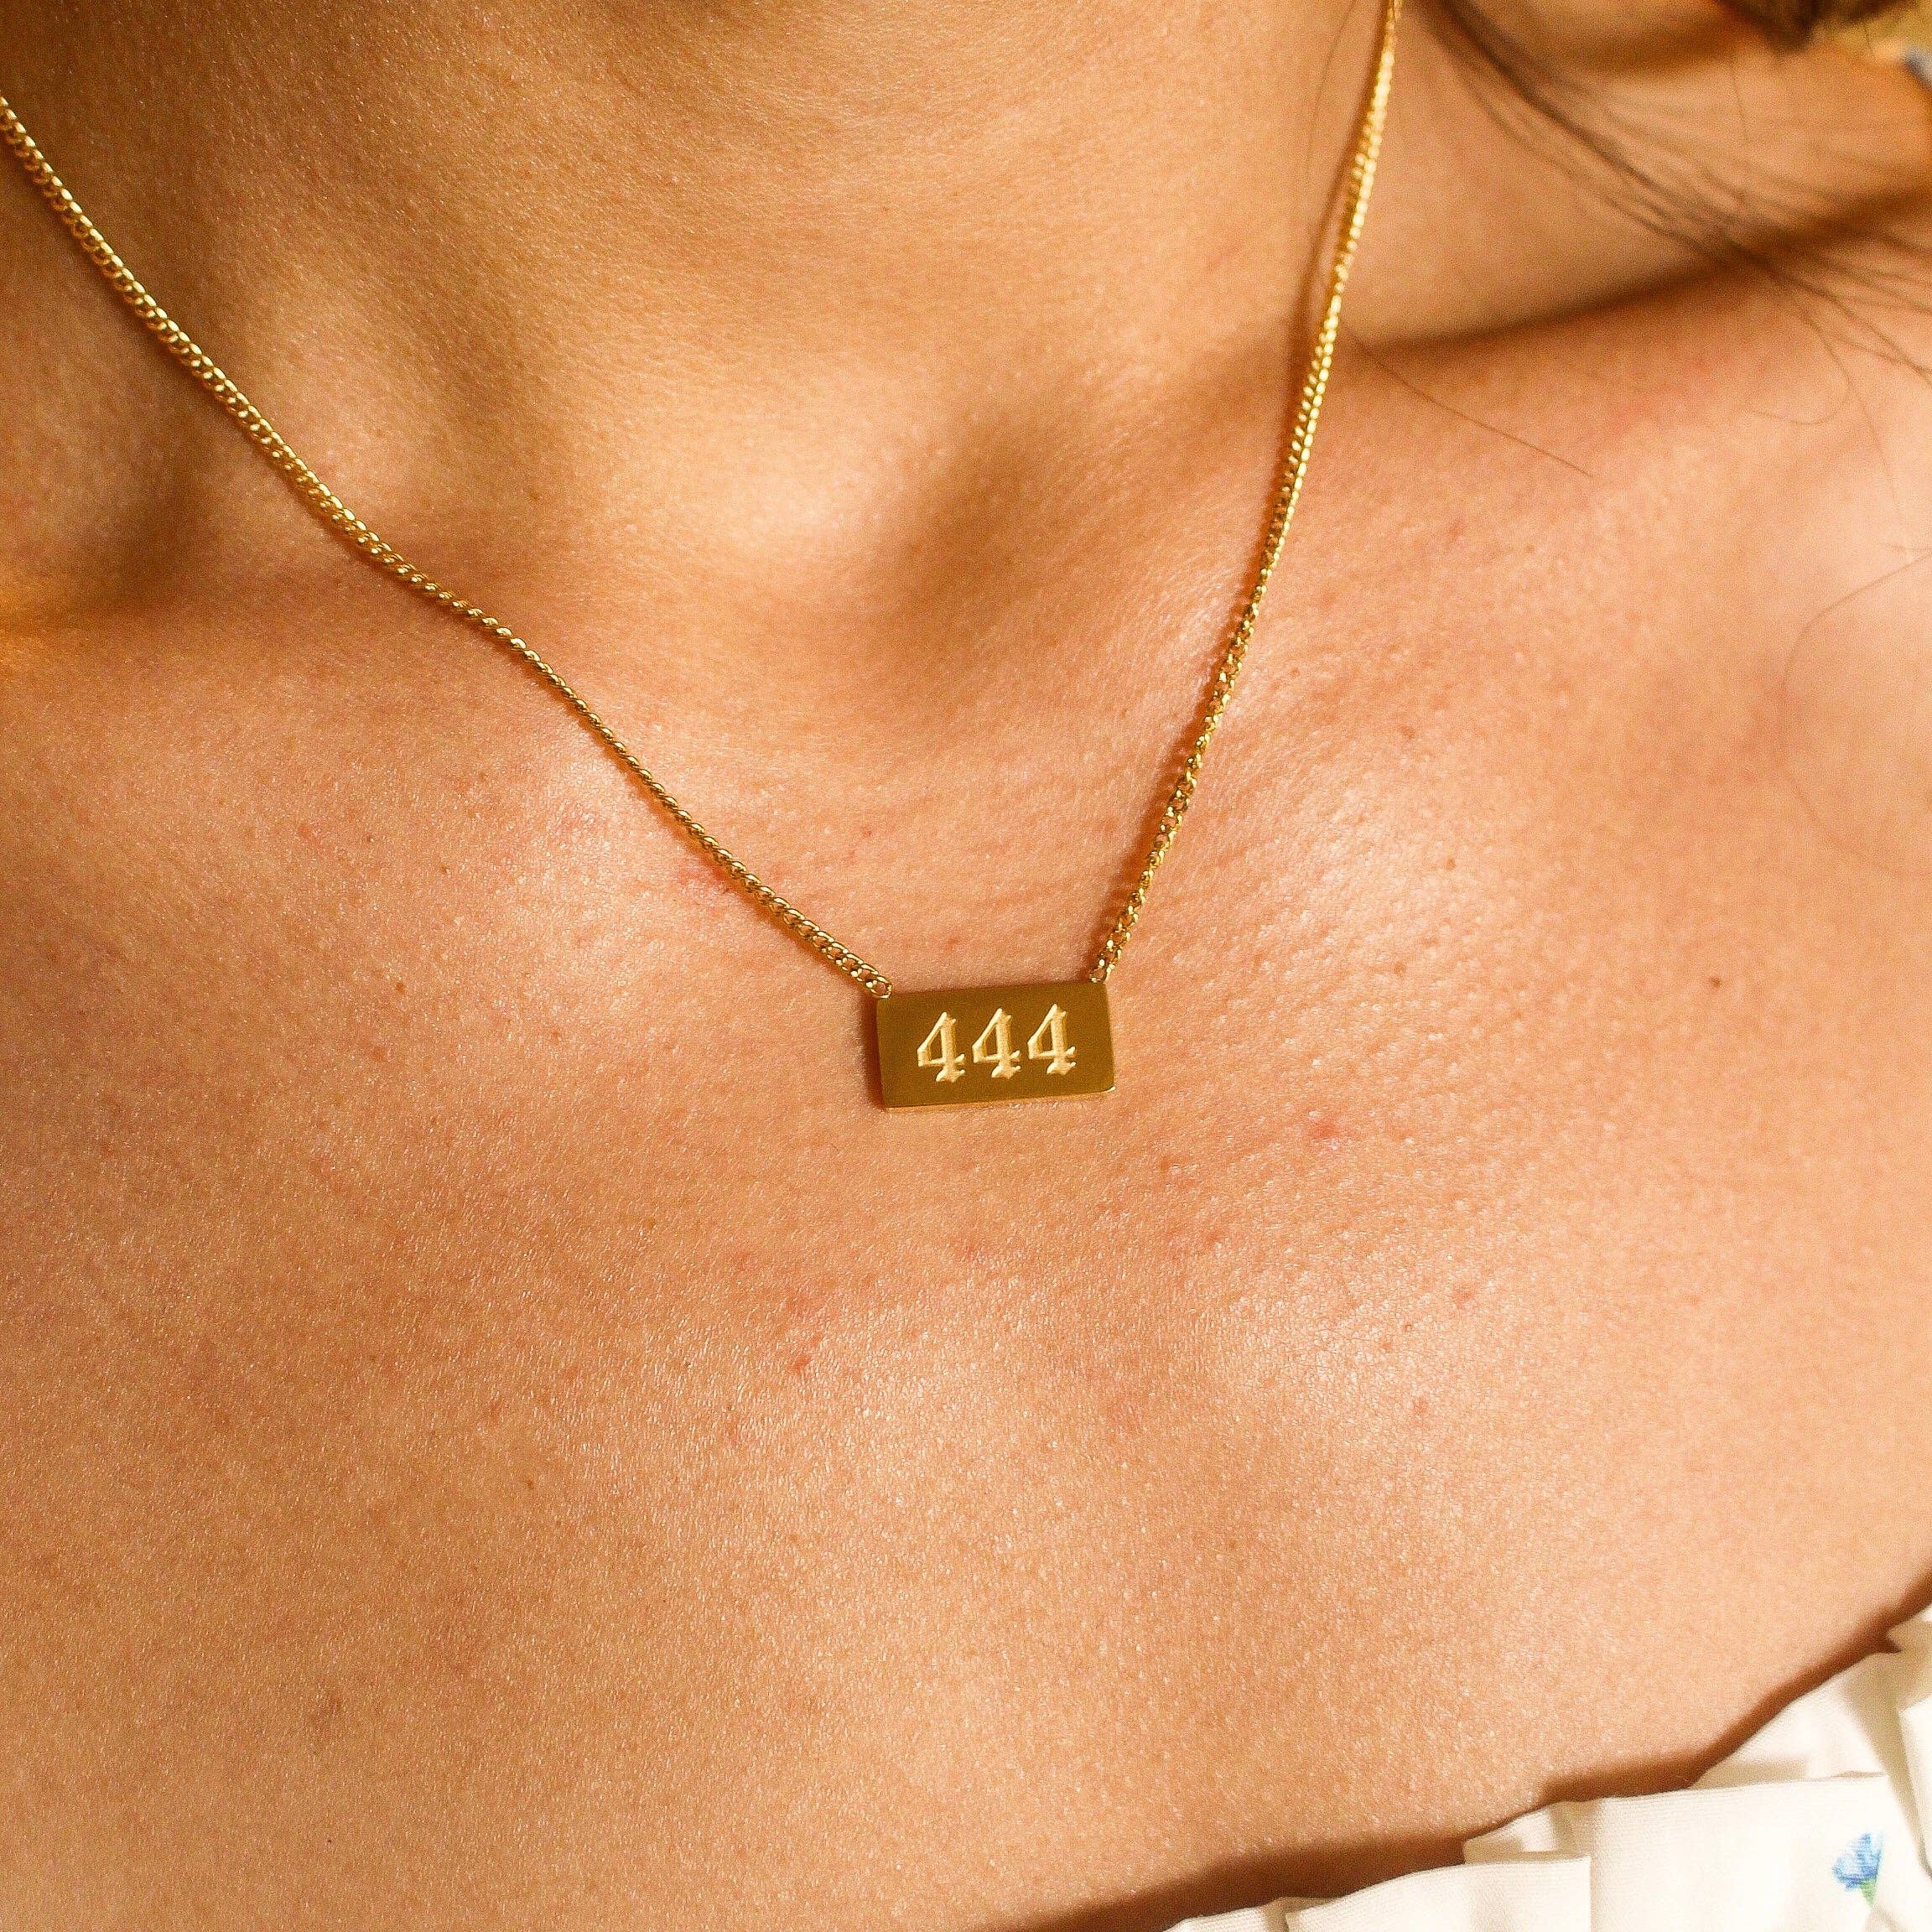 Fran's Hause - Numerology Inspired Pendant Necklace